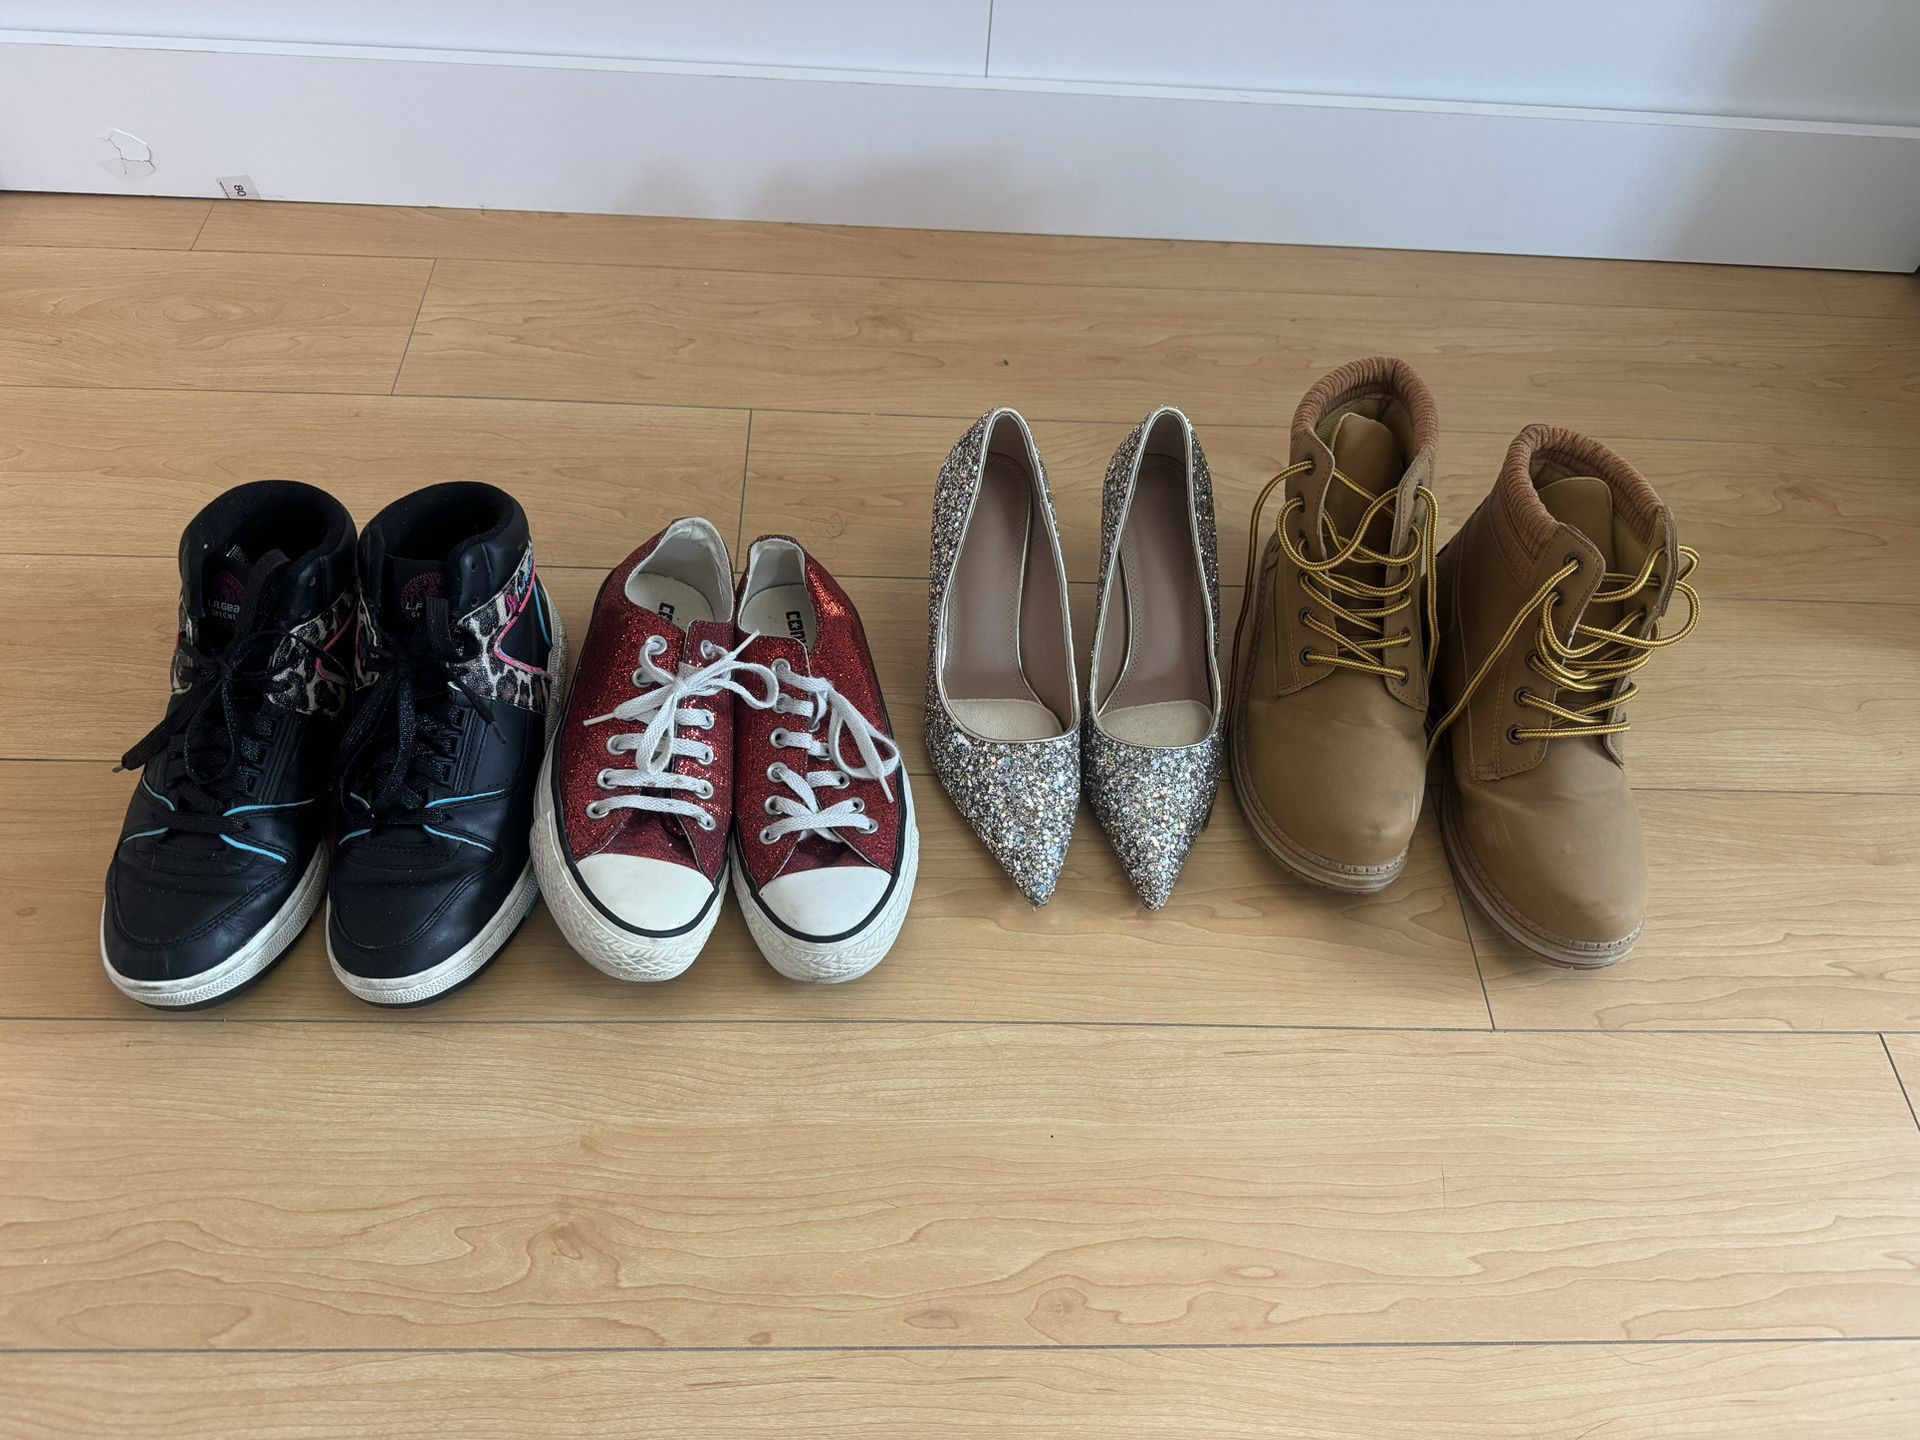 4 Pairs Of Women’s Shoes Size 7 